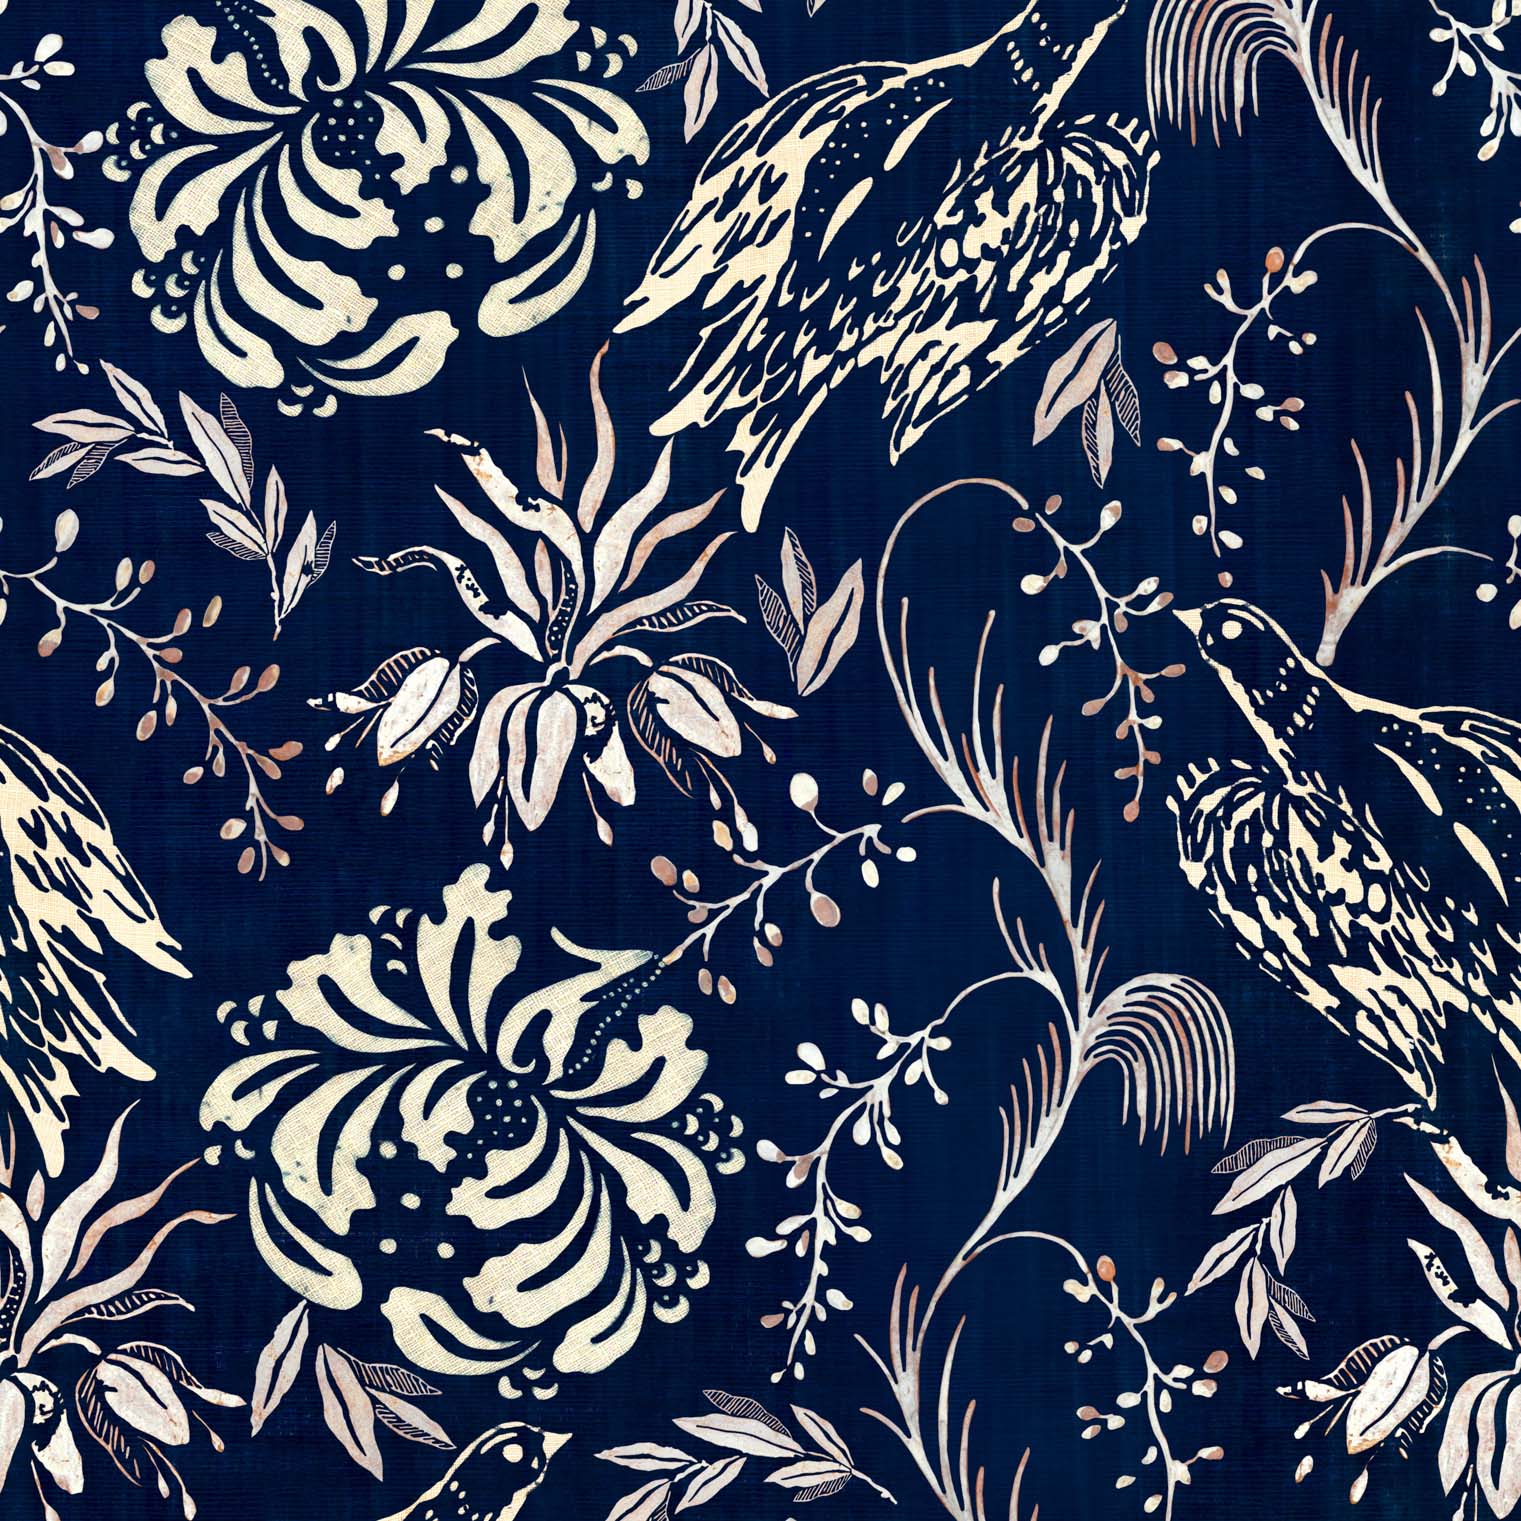 images/productimages/small/folk-embroidery-indigo-52x70cm-wp30016-wallpaper.jpg